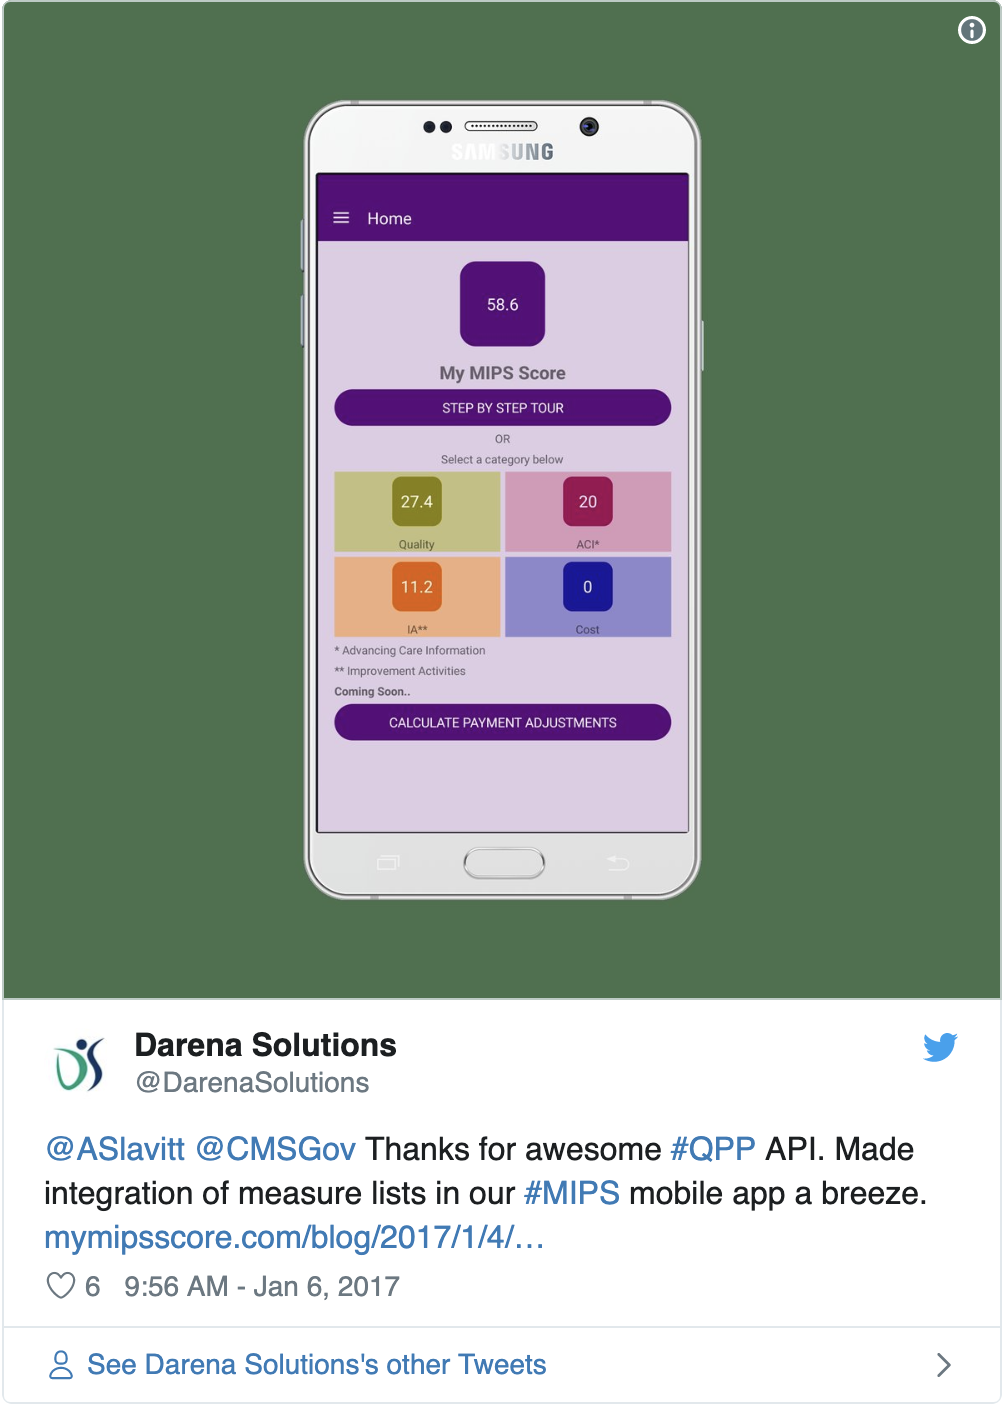 A screenshot of a Tweet from Darena Solutions: "Thanks for awesome #QPP API. Made integration of measure lists in our #MIPS mobile app a breeze."